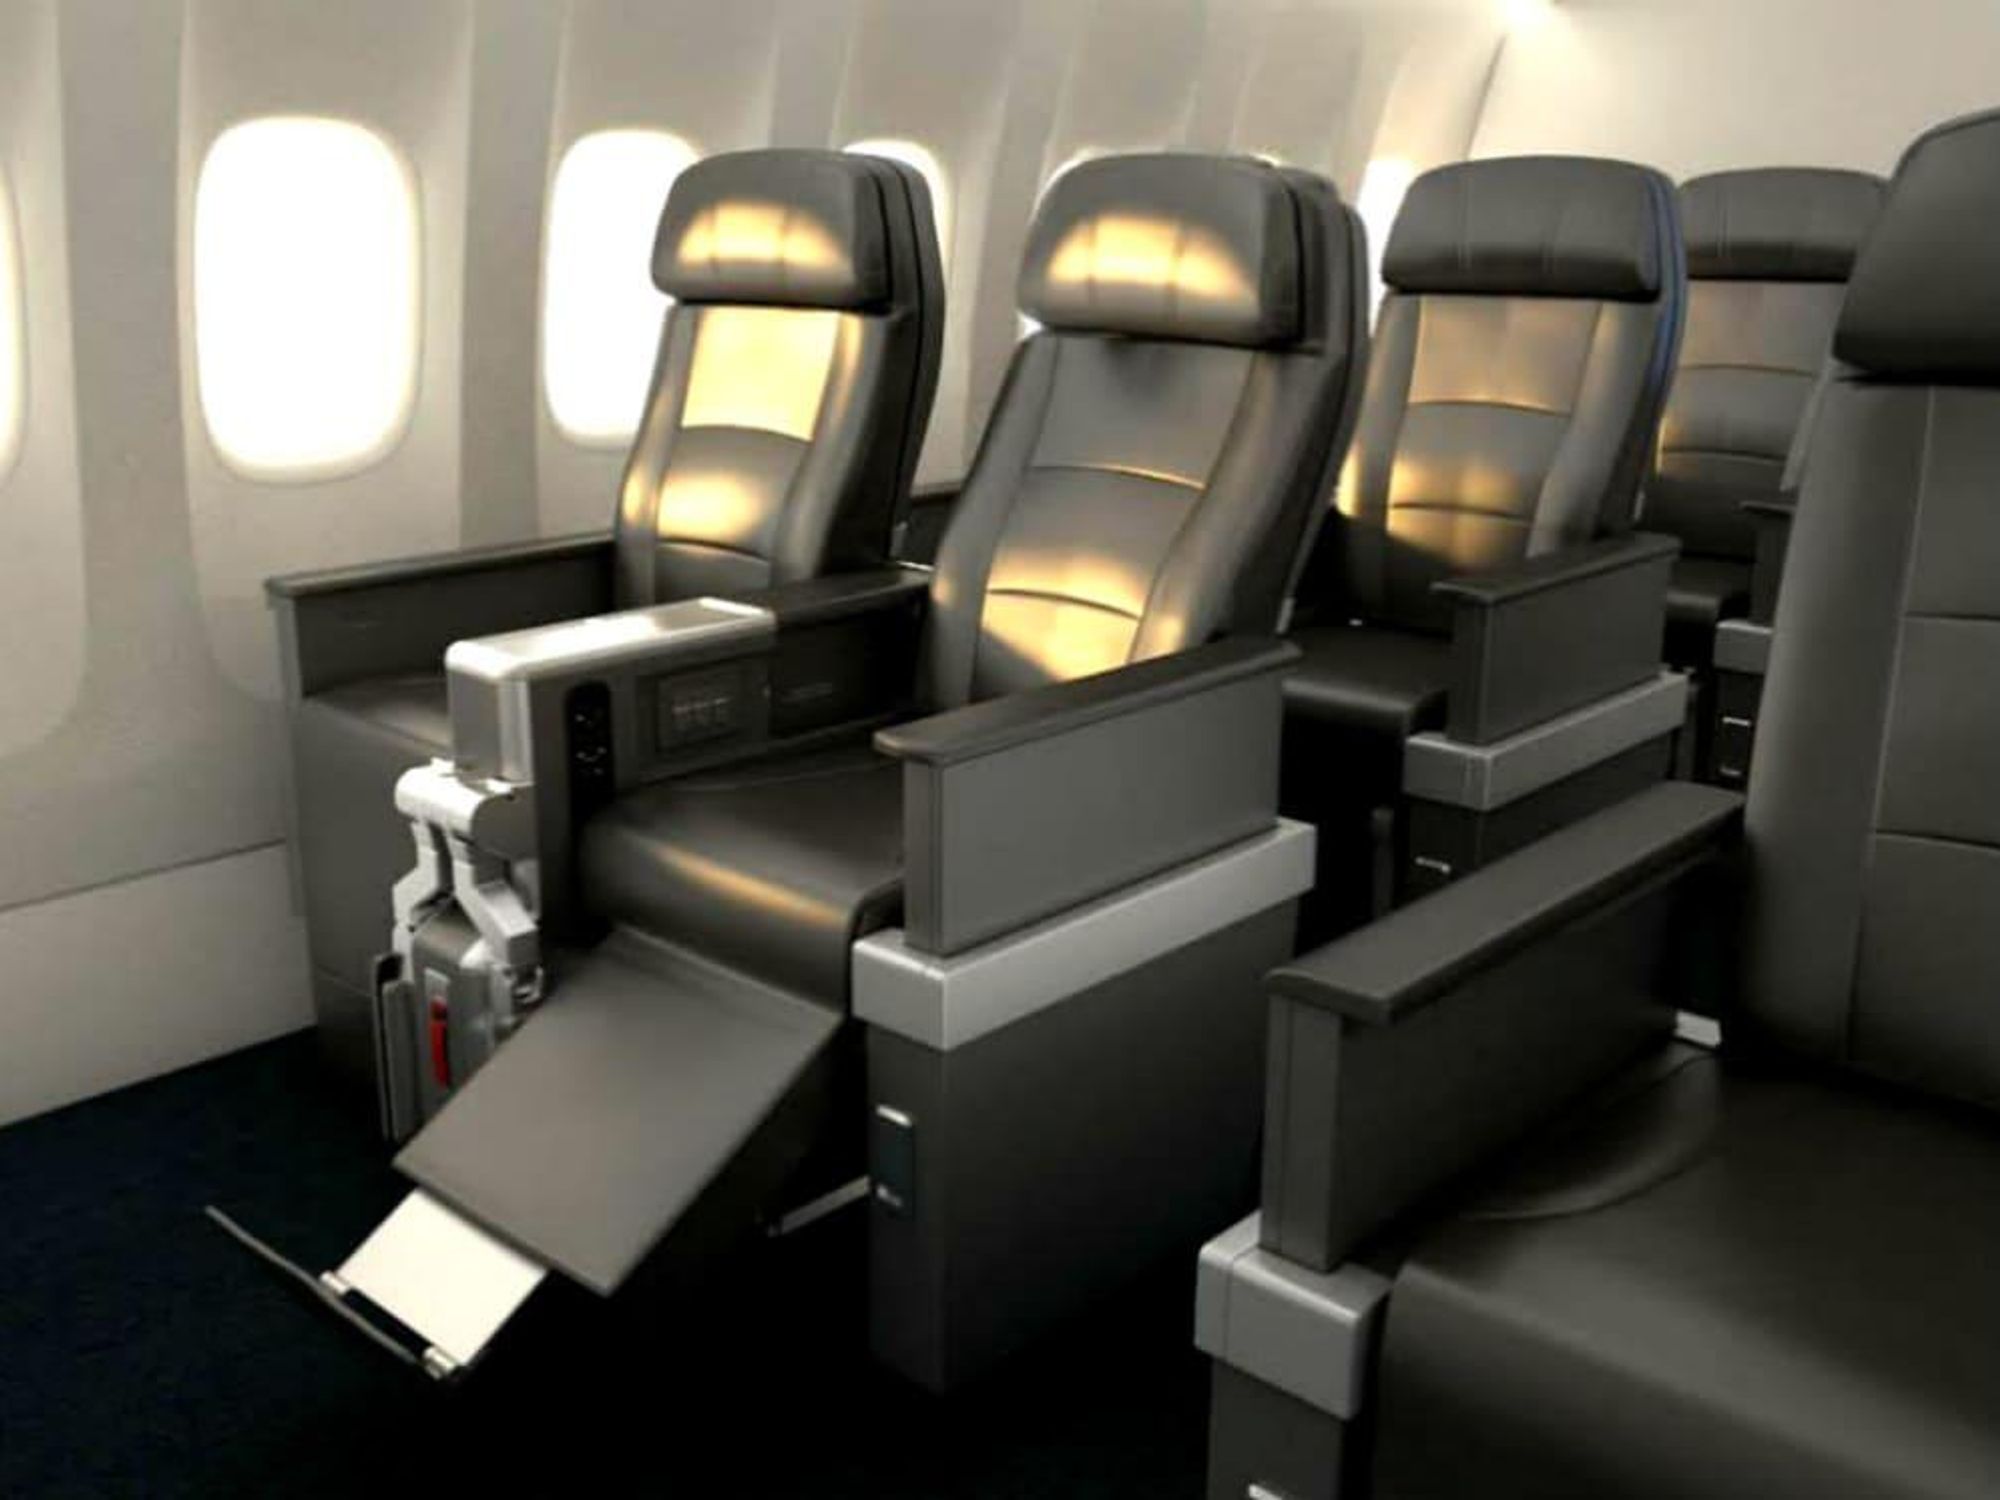 American Airlines seating